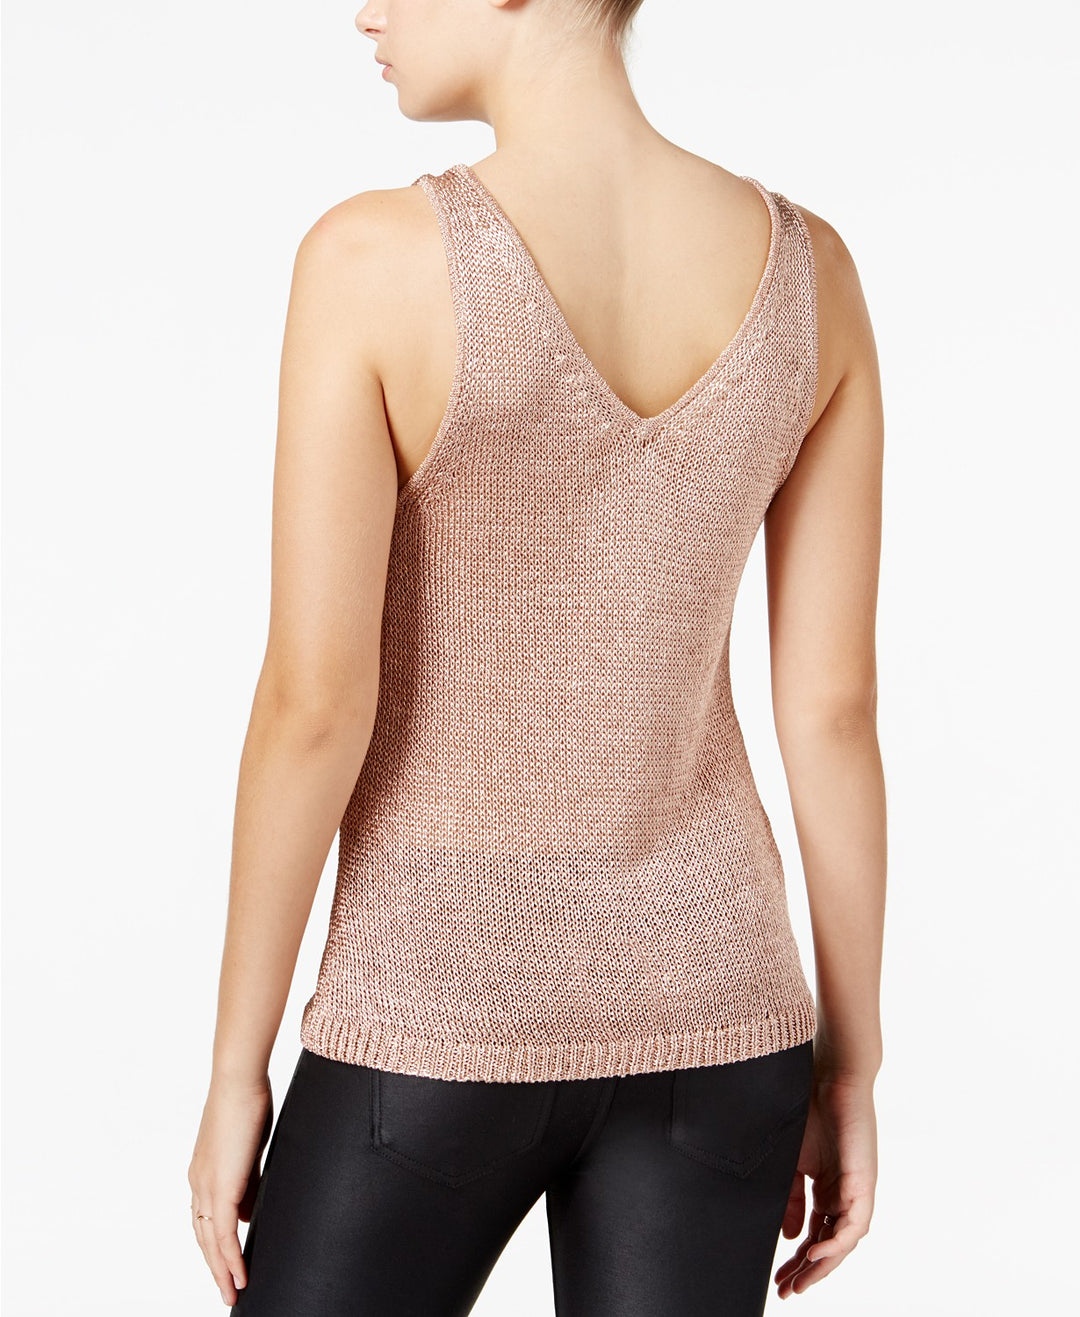 Metallic V-Neckline Tank Top
Bar III's sweater-knit tank is a cool choice with jeans or as a layering piece for business wear. · V-neckline · Pullover styling · Allover sweater knit with metallic threading · Loose fit · Hits at hip · Rayon/metallic · Hand wash · Imported
Metallic V-Neckline Tank Top
Bar III's sweater-knit tank is a cool choice with jeans or as a layering piece for business wear. · V-neckline · Pullover styling · Allover knit sweater sweater

608356038984
$54.99
$54.99
$54.99
clearance, gold